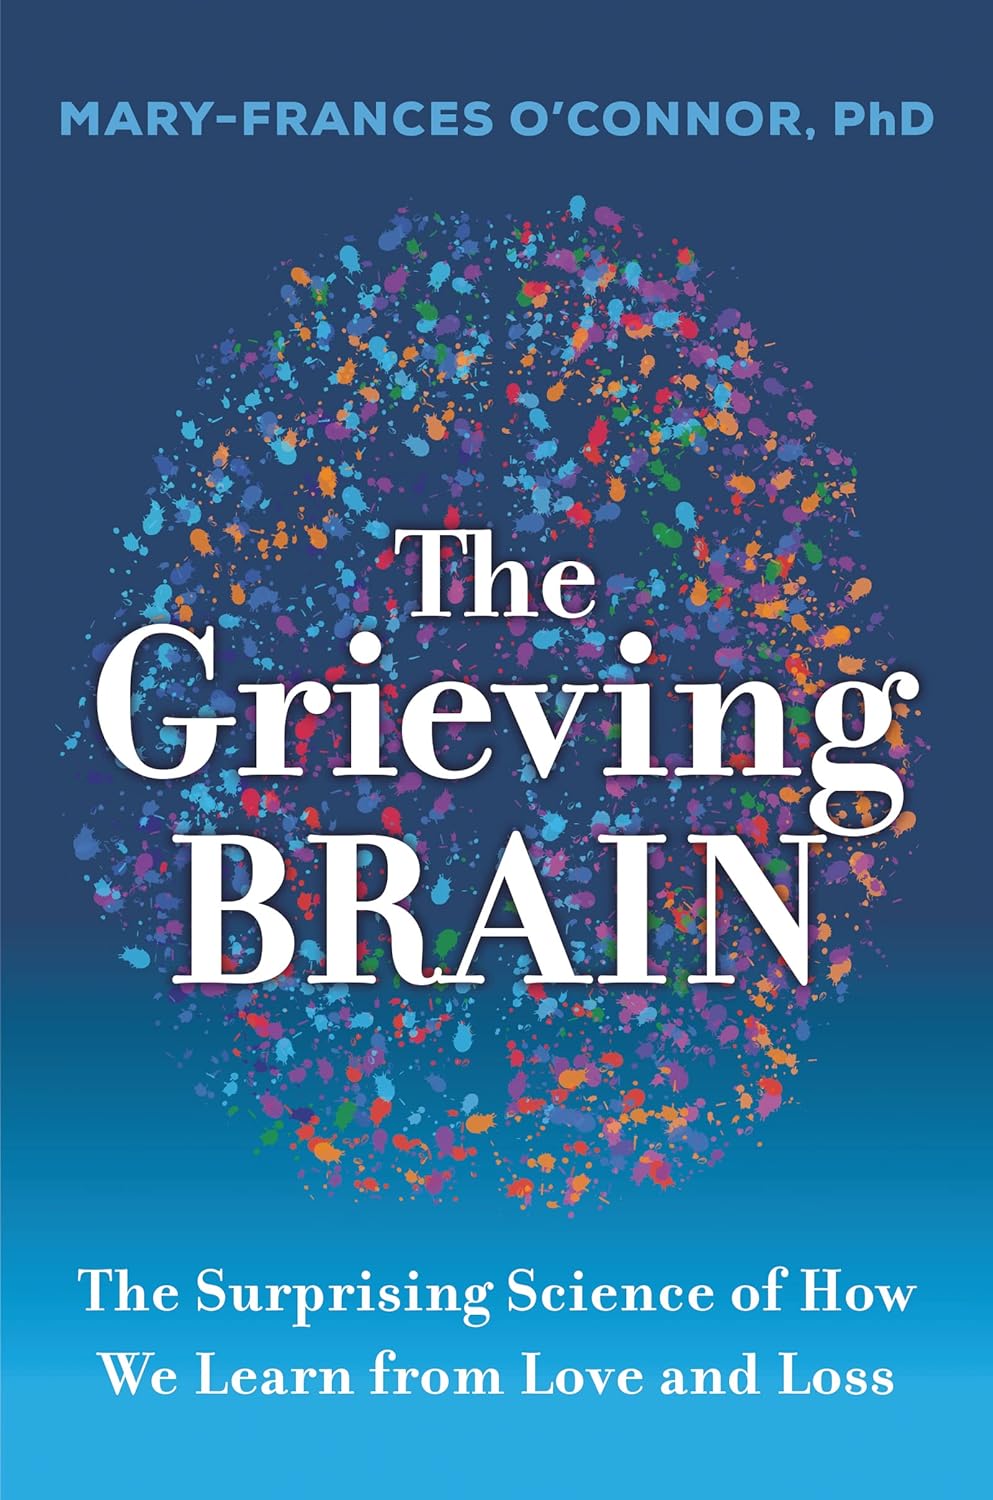 The Grieving Brain: The Surprising Science of How We Learn from Love and Loss by Mary-Frances O'Connor, PhD